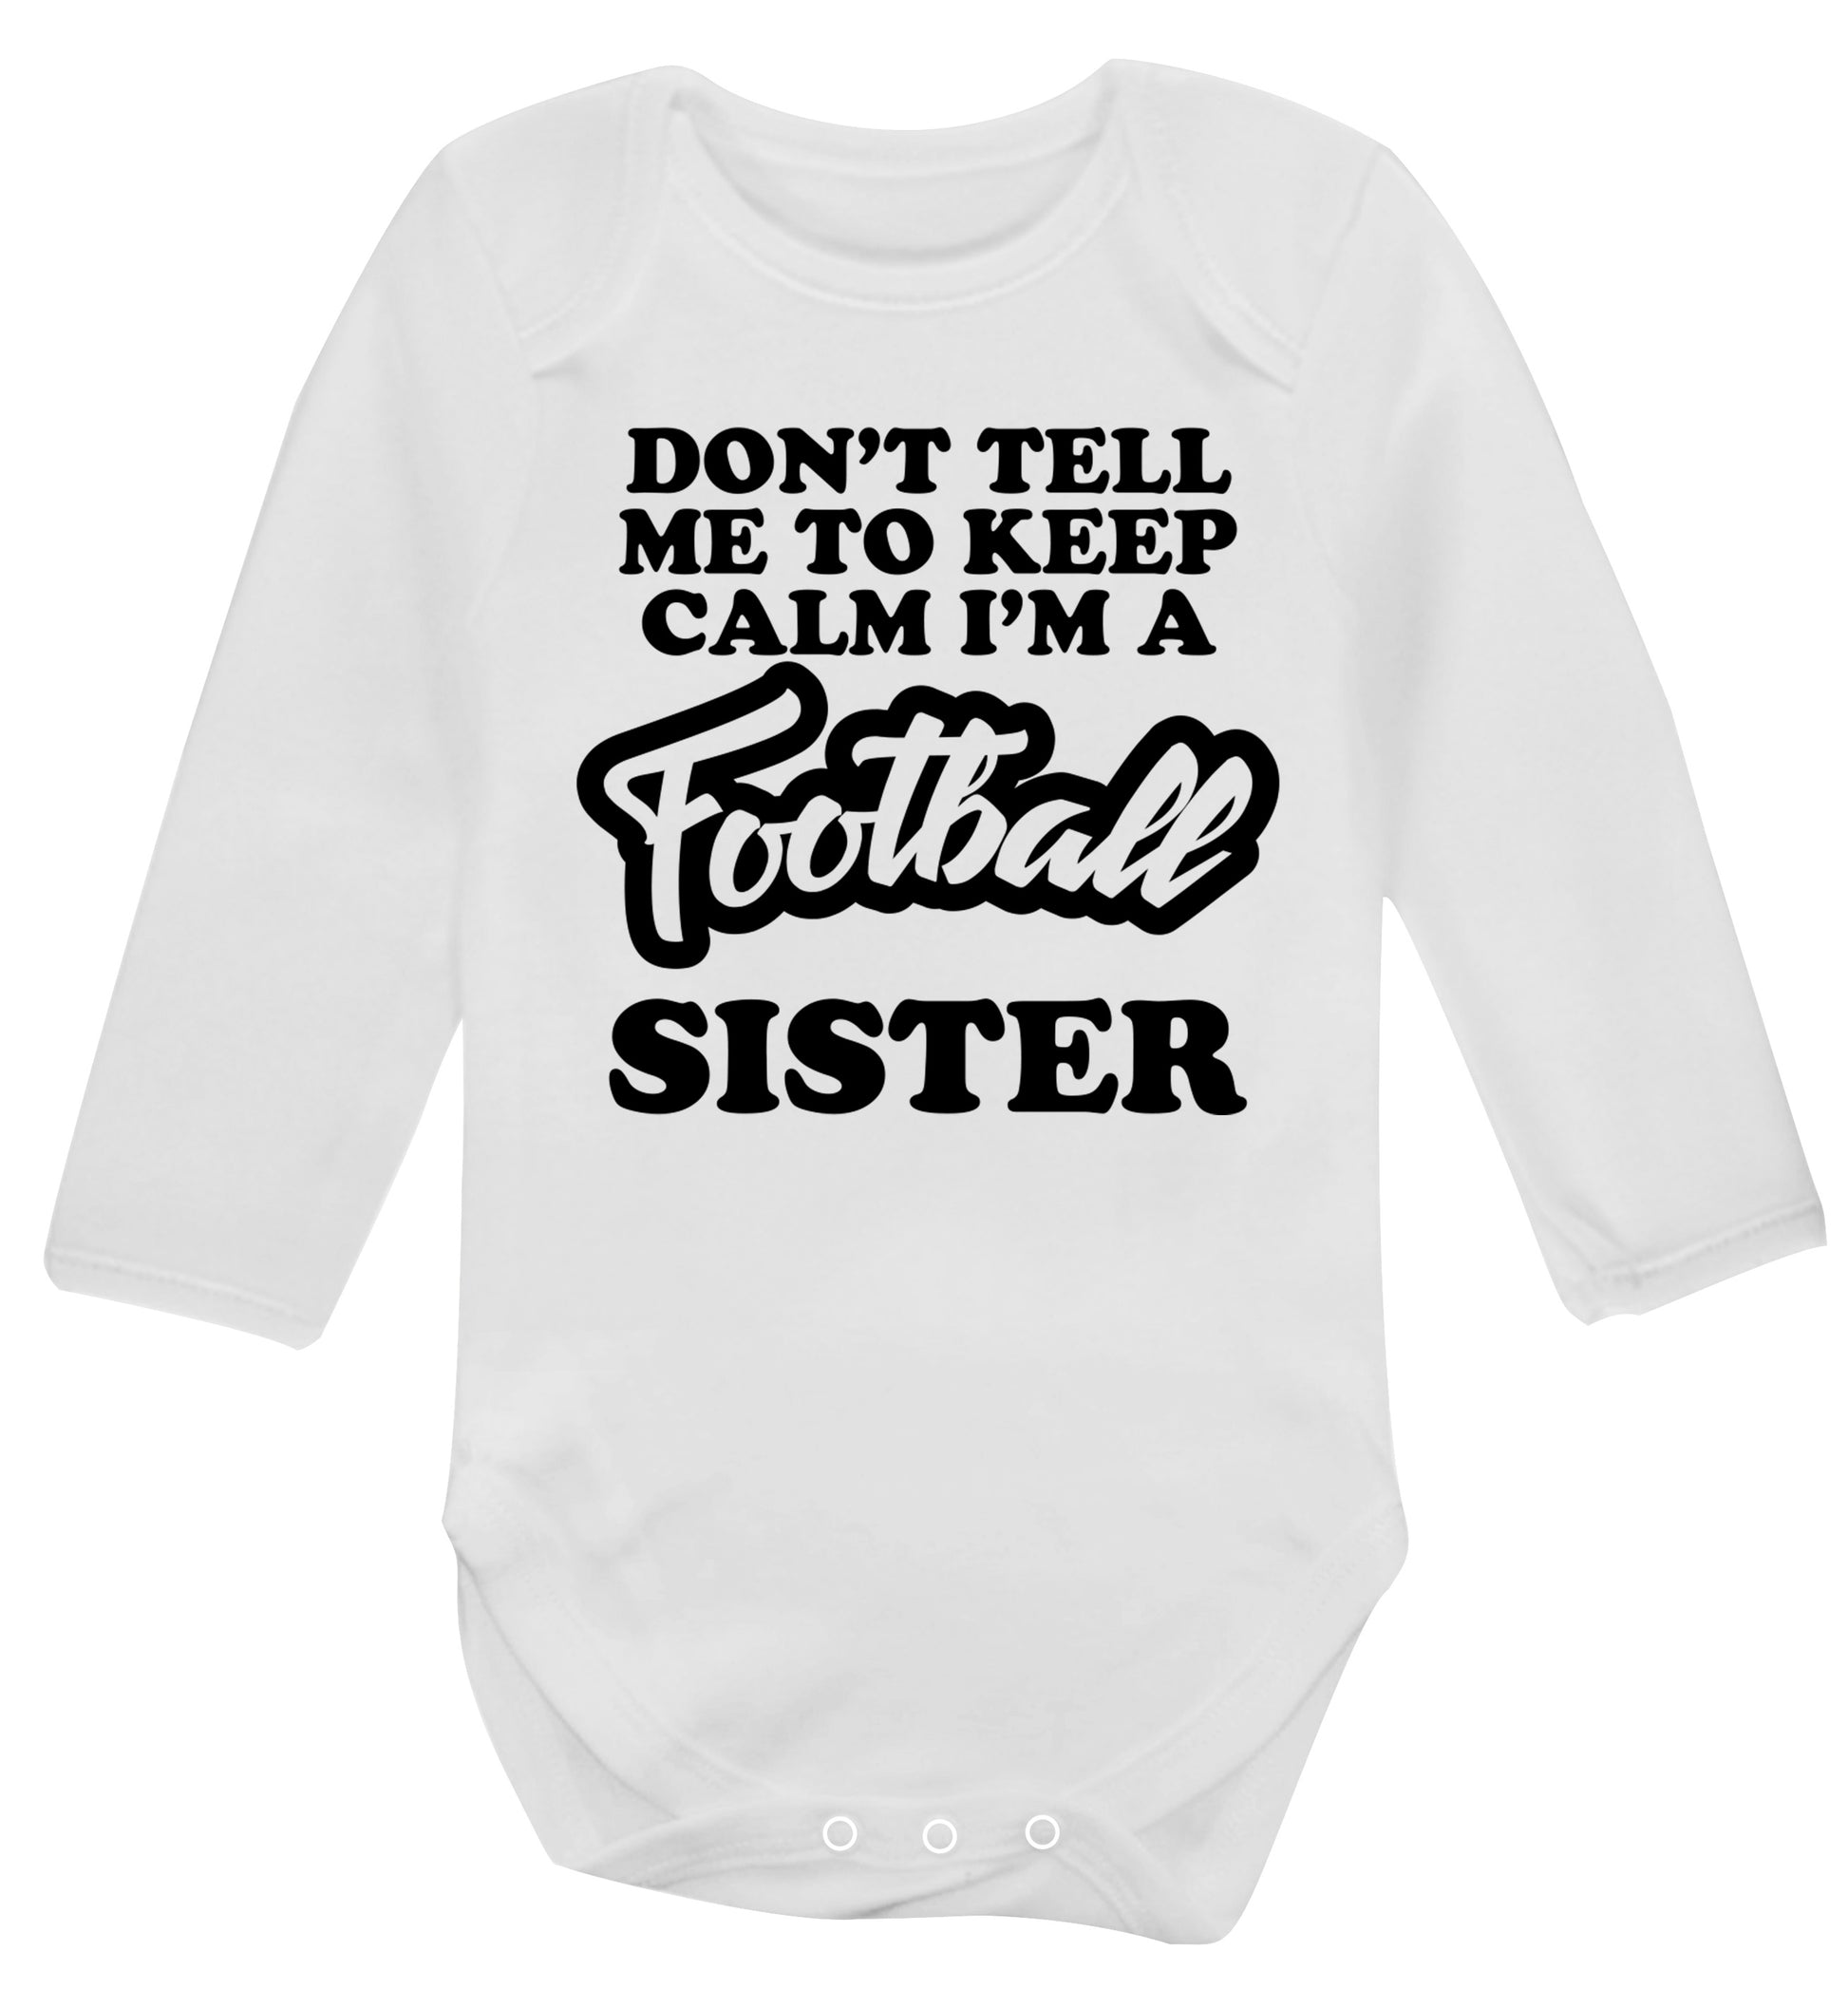 Don't tell me to keep calm I'm a football sister Baby Vest long sleeved white 6-12 months